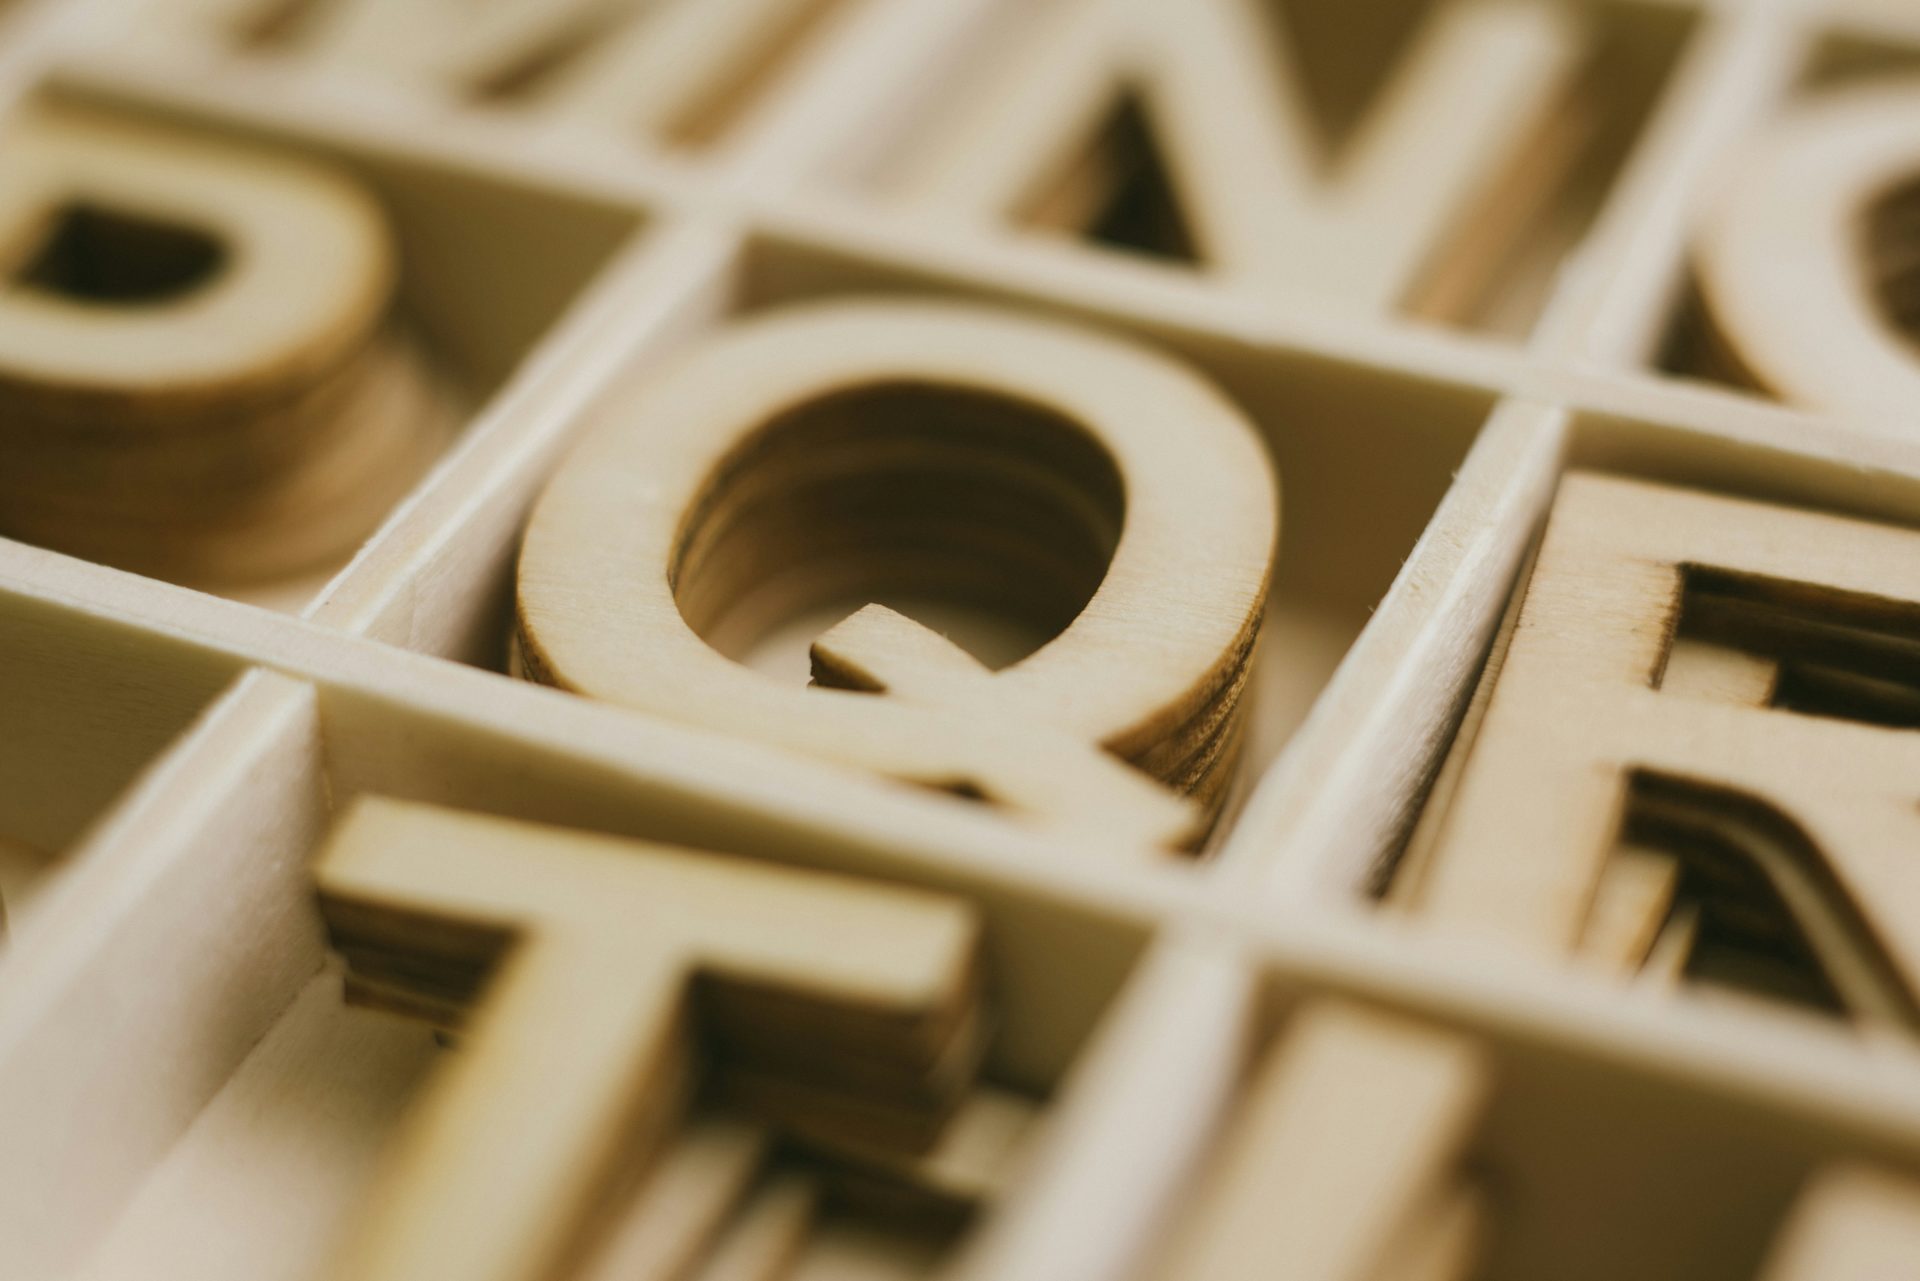 A letter Q made from wood as part of a puzzle with letters